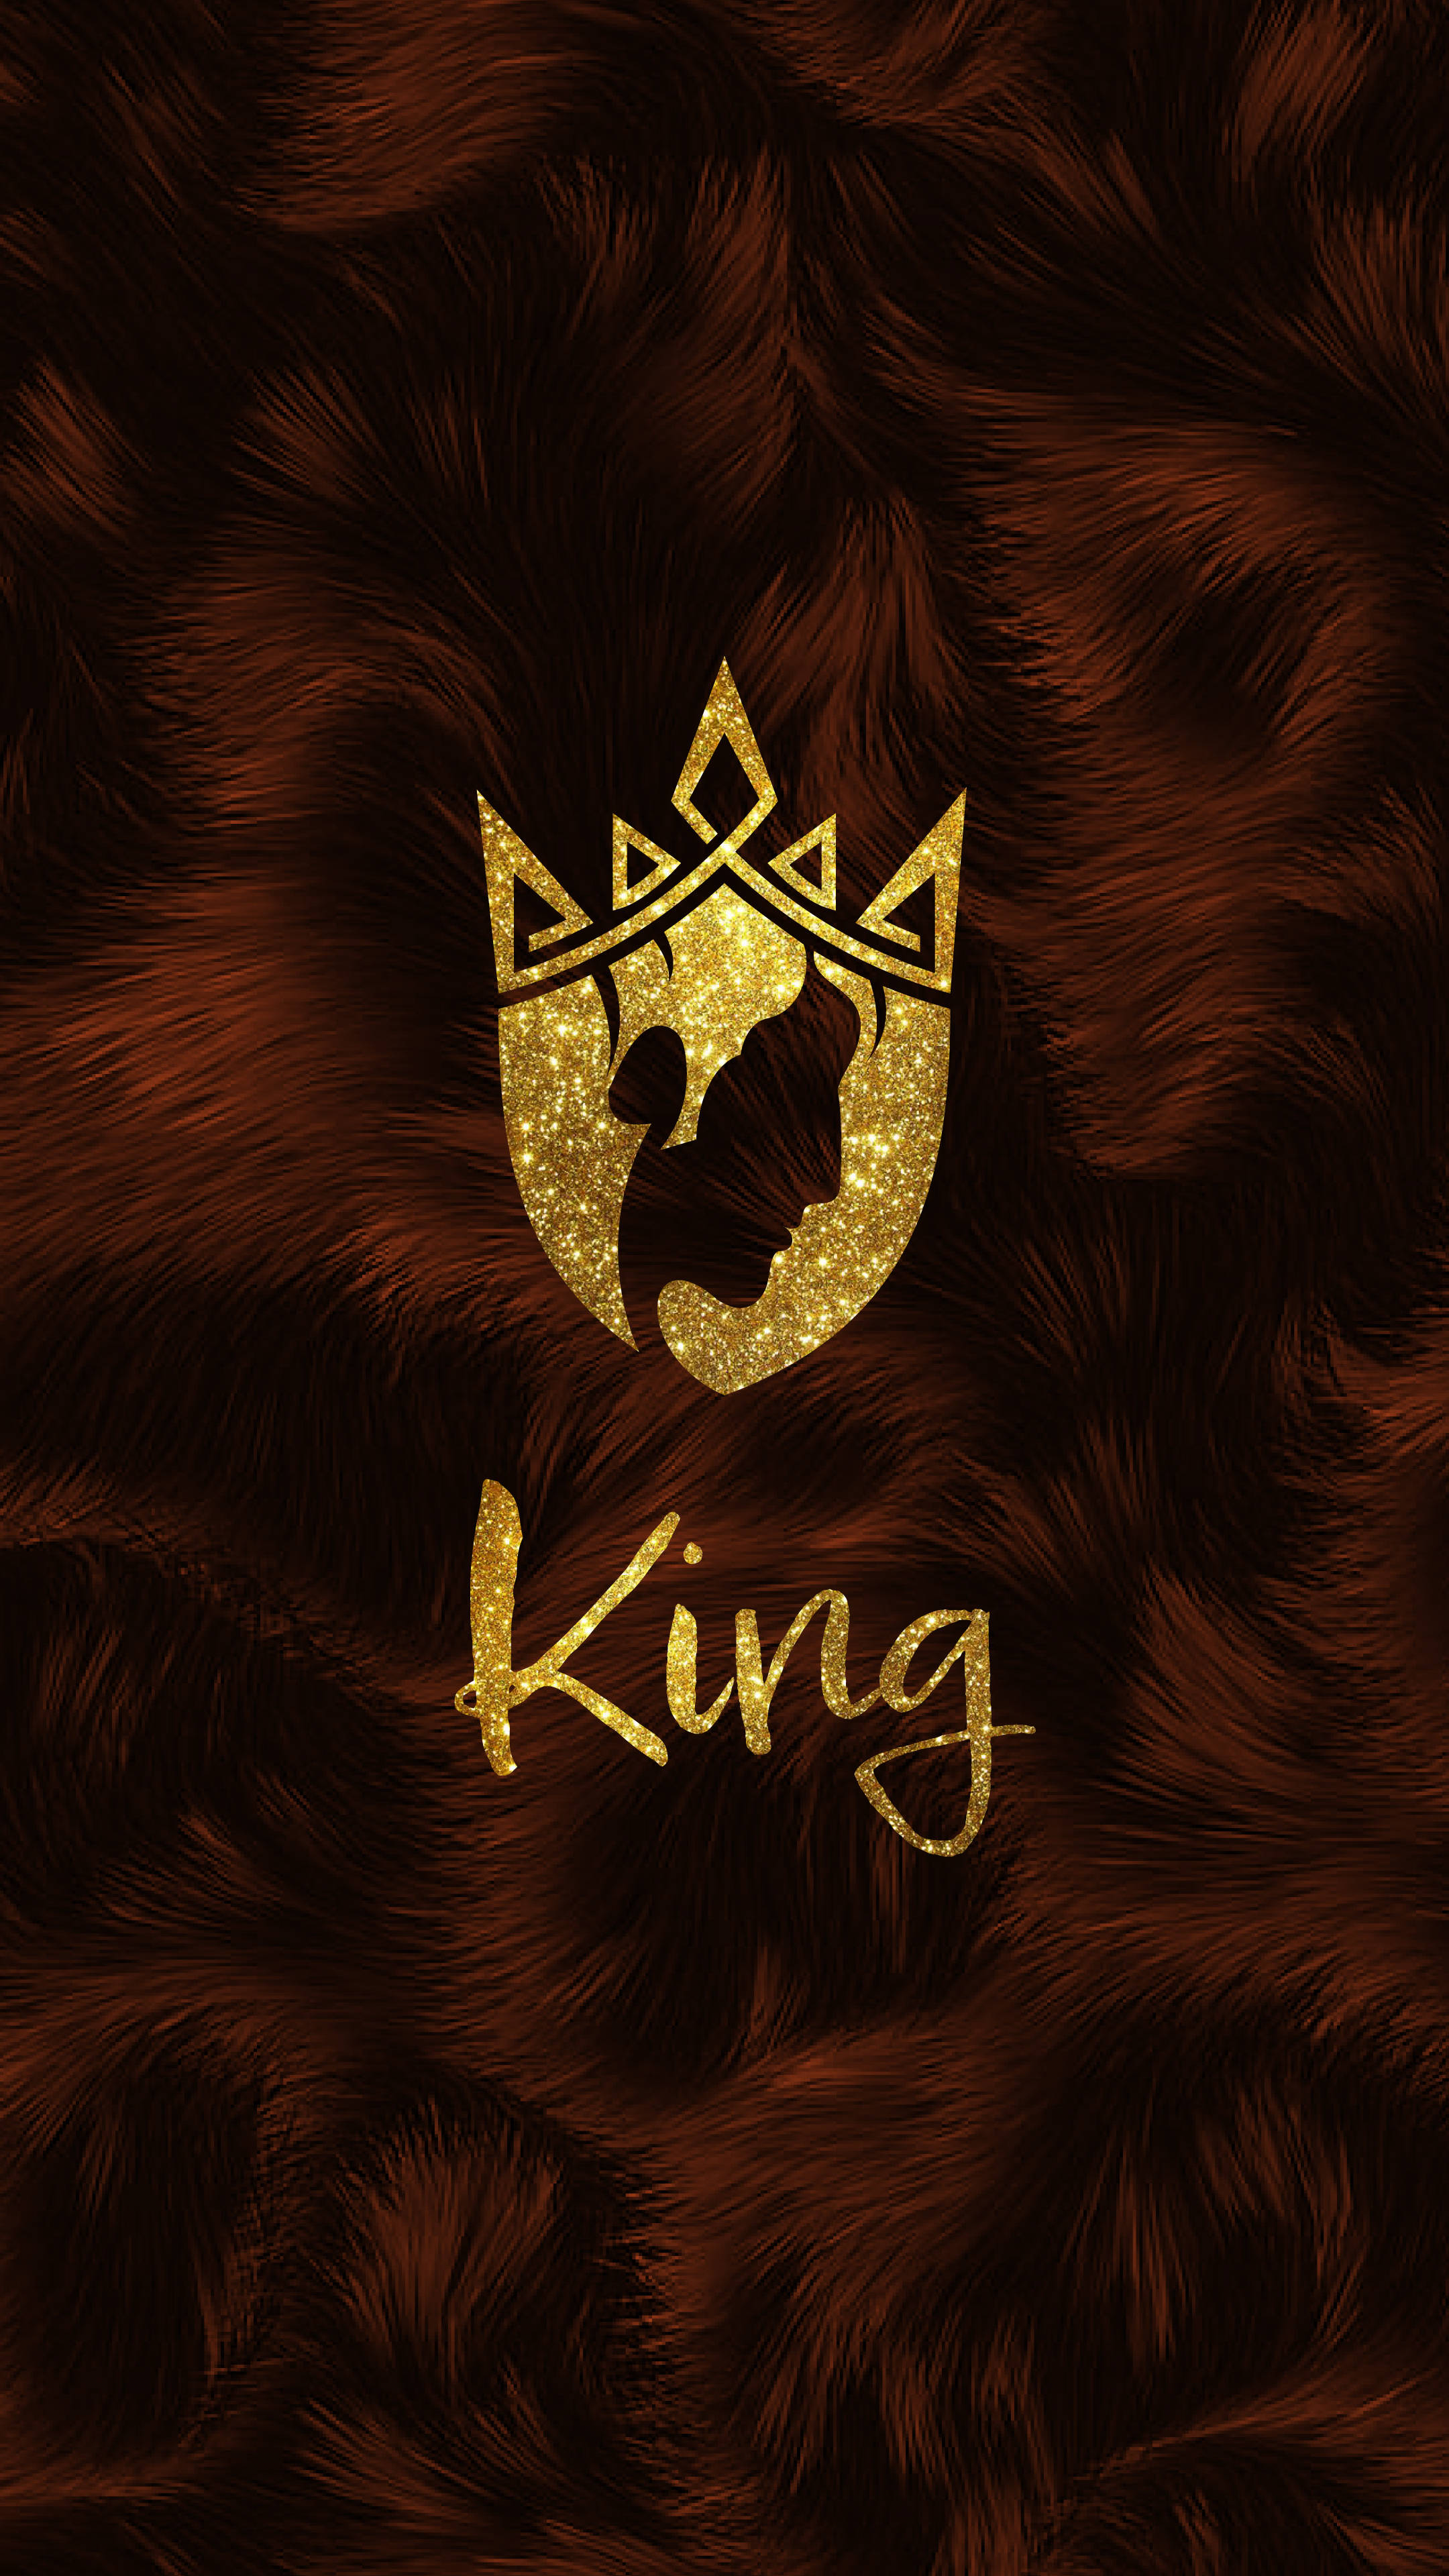 King the Wildfire Iphone Wallpapers because hes cool  rOnePieceTC